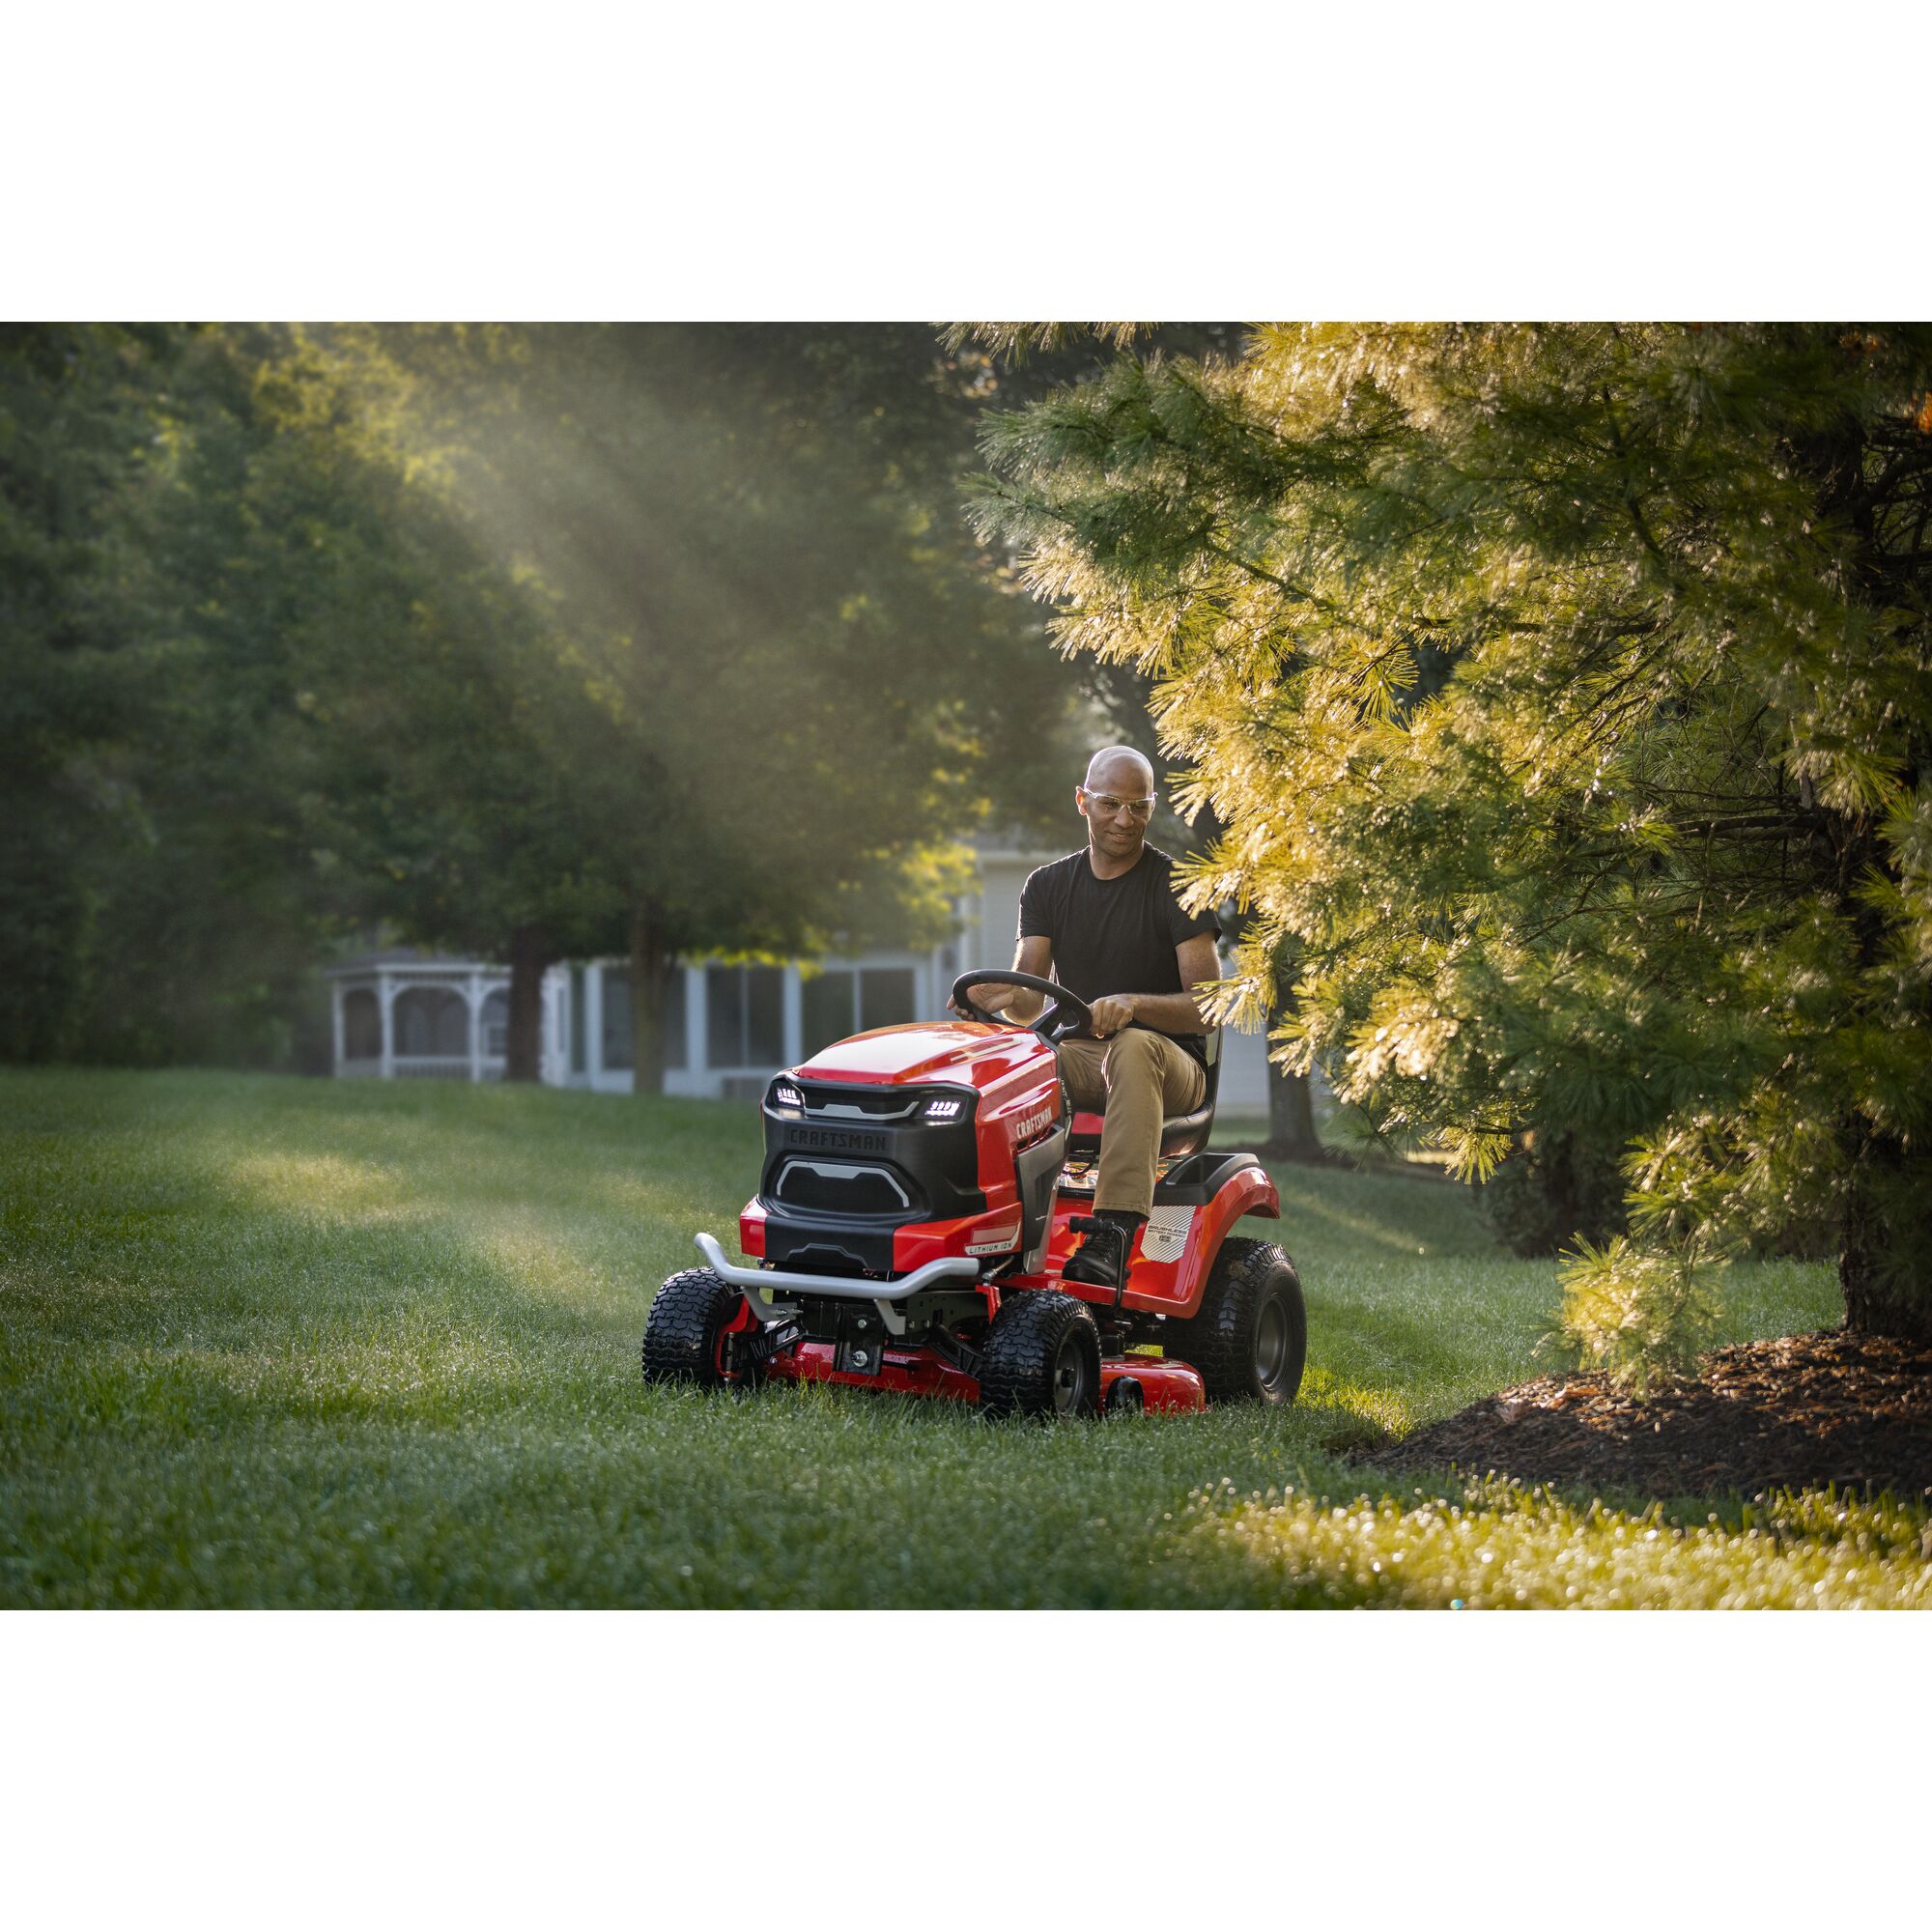 CRAFTSMAN Battery-Powered Riding Mower mowing background with woods and fence in background